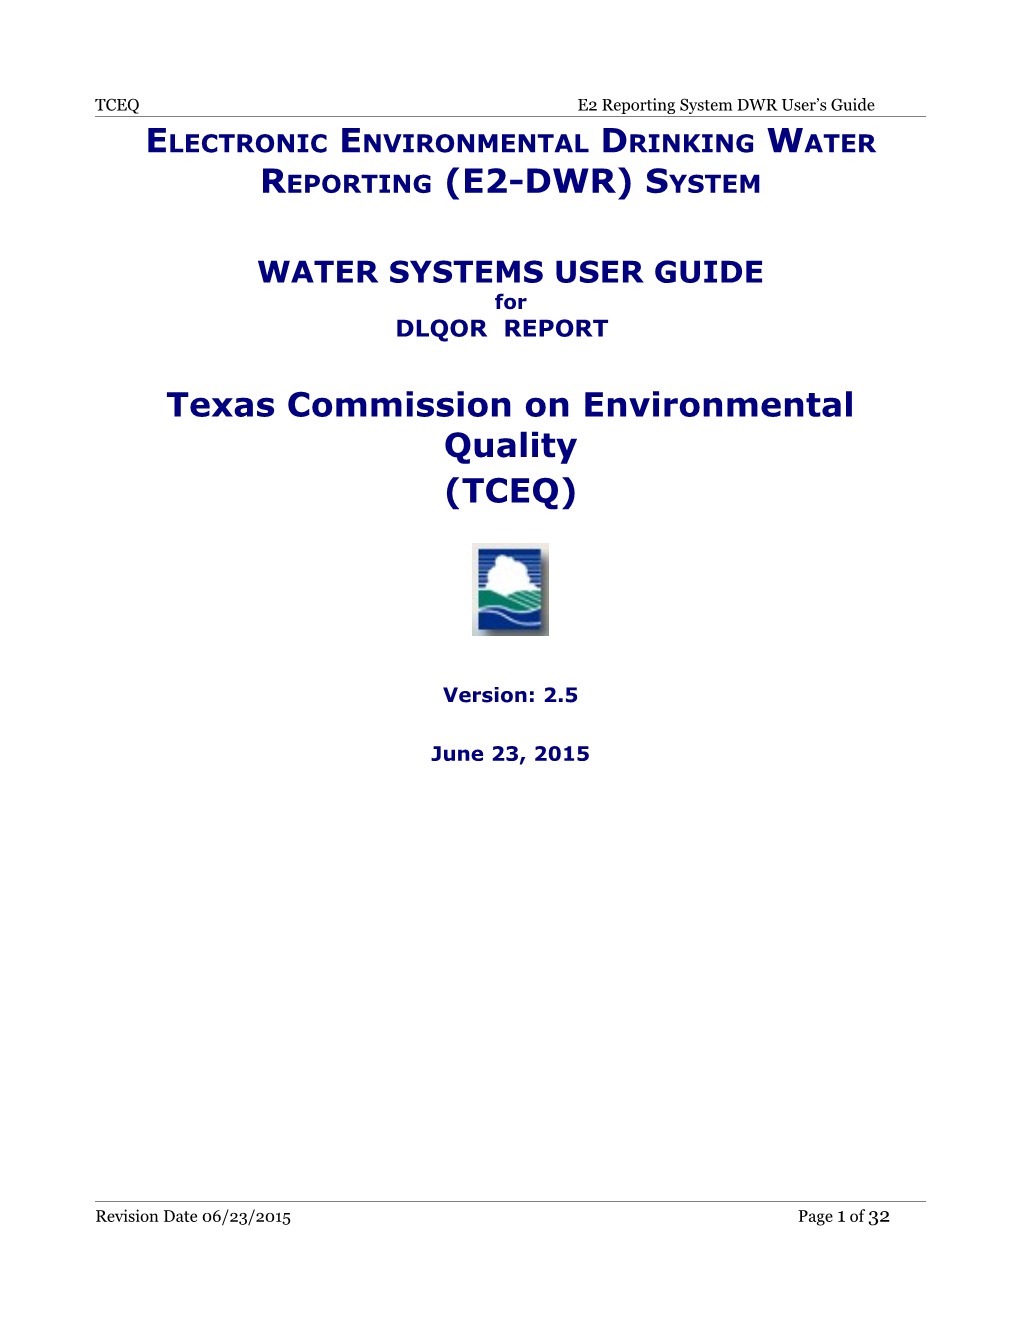 Electronic Environmental Drinking Water Reporting (E2-DWR) System